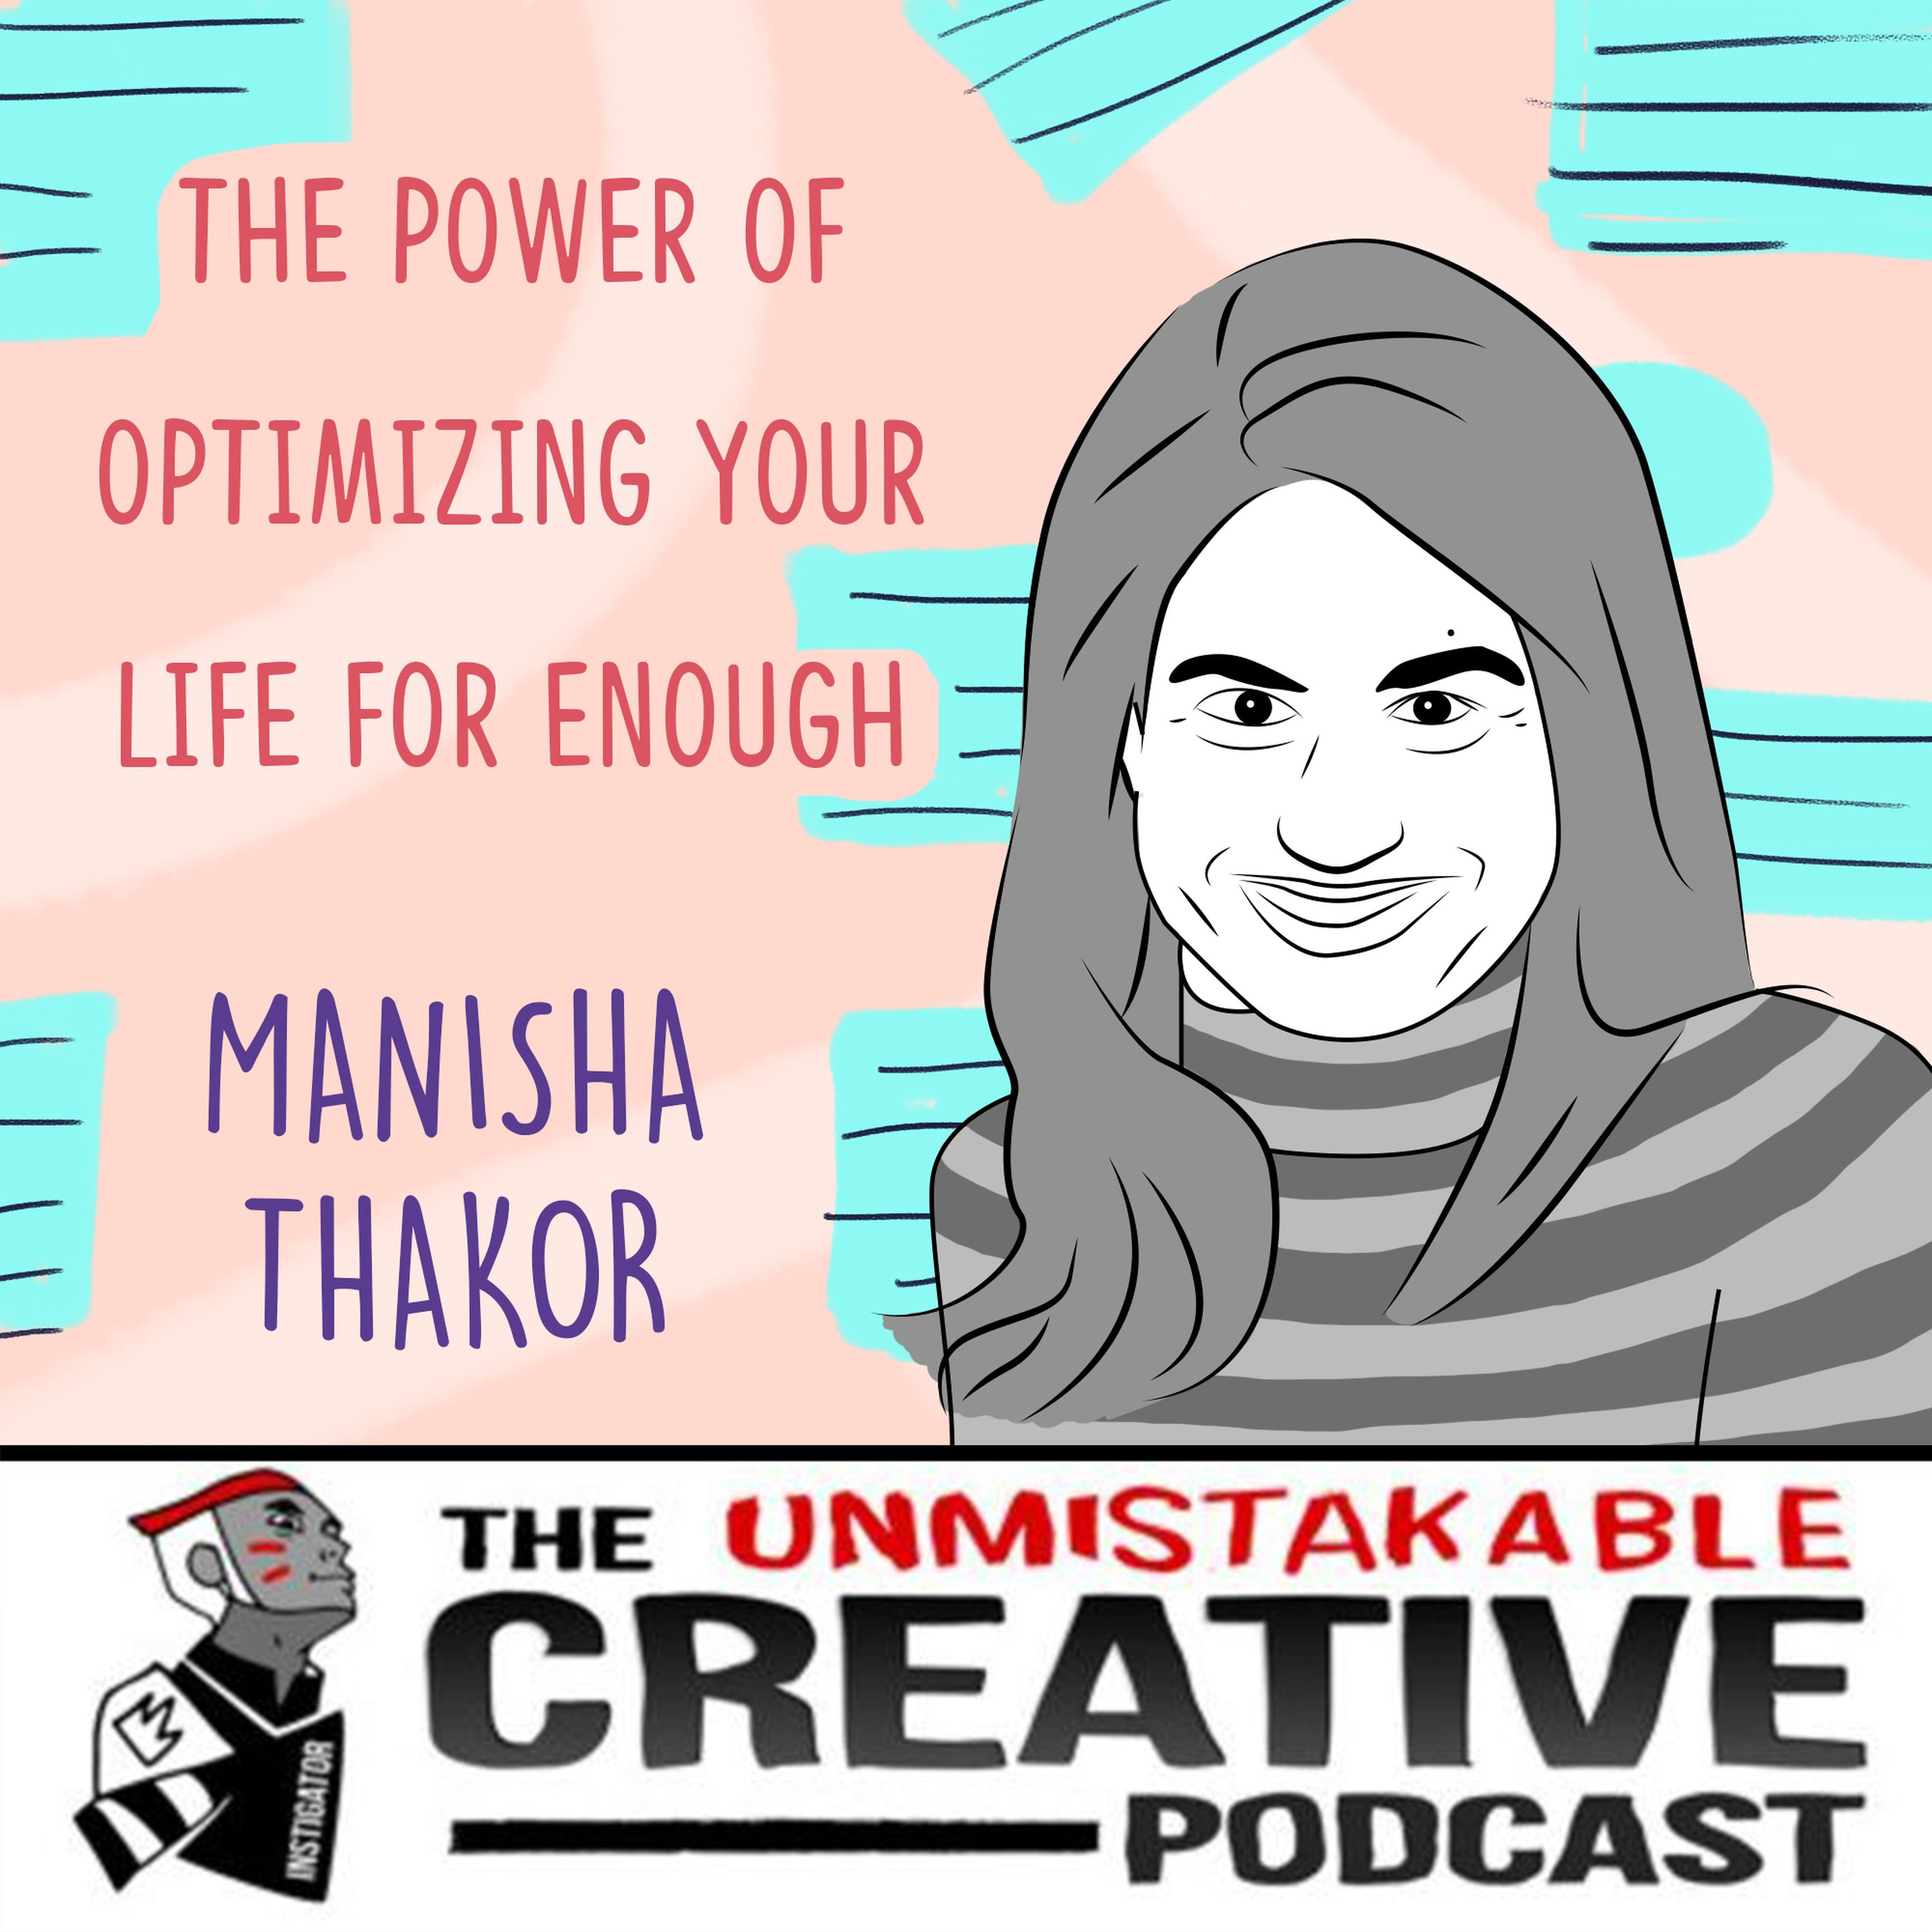 The Power of Optimizing Your Life for Enough with Manisha Thakor